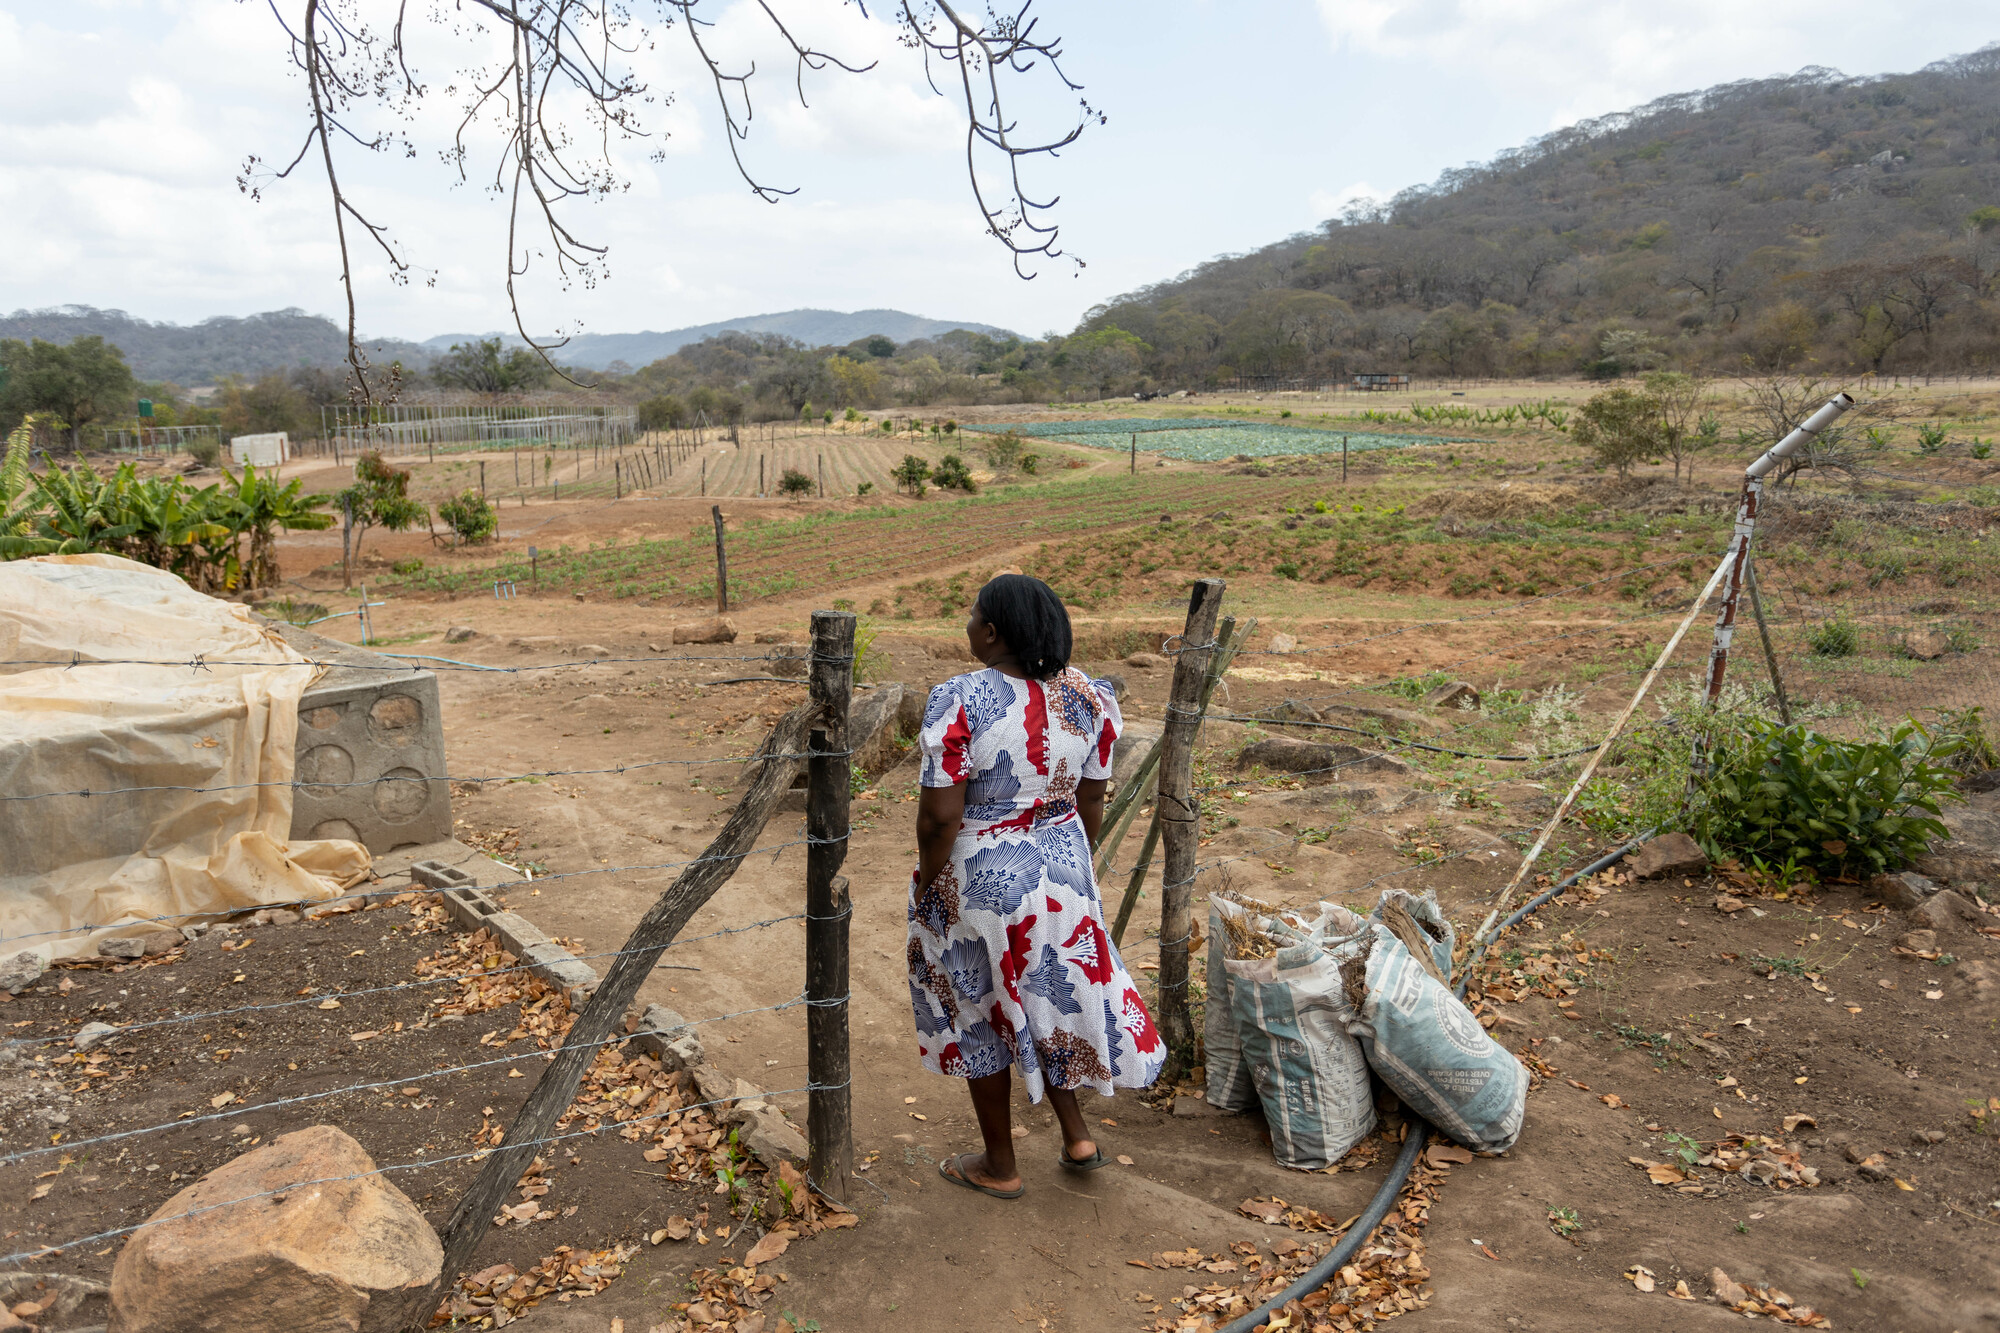 A Zimbabwean woman enters through the opening of a fence to her farm